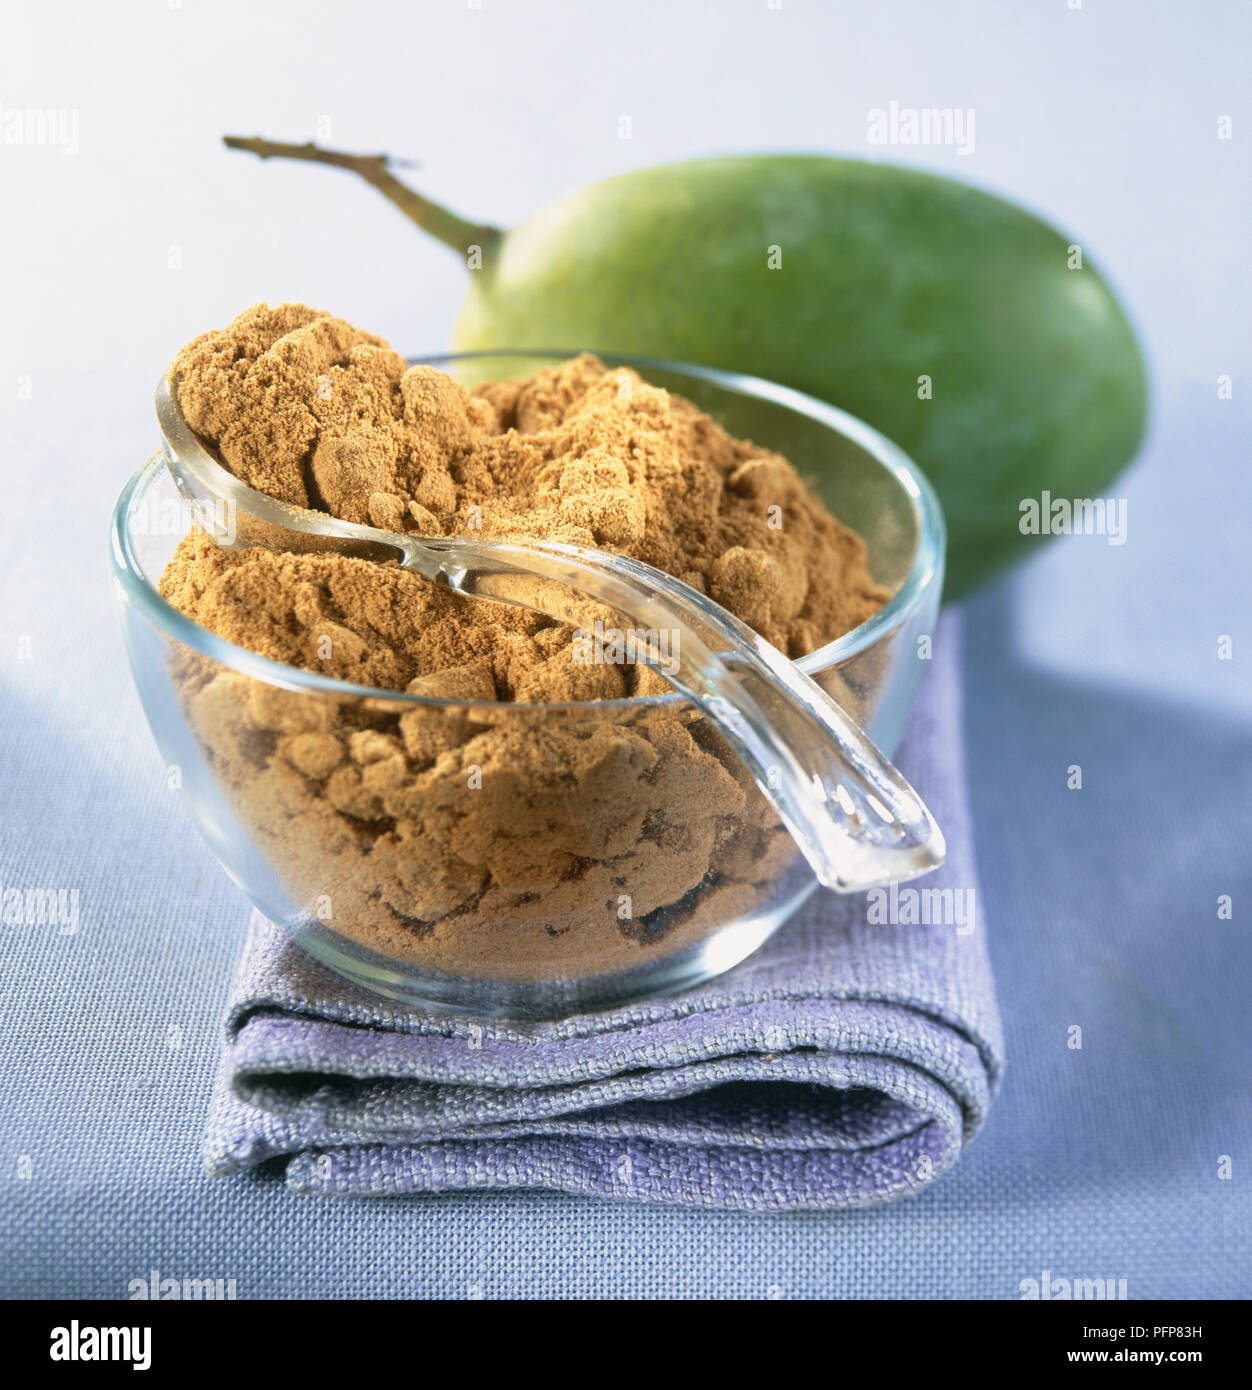 Powdered amchoor, a type of mango, on glass spoon and in glass bowl, with whole mango in the background Stock Photo